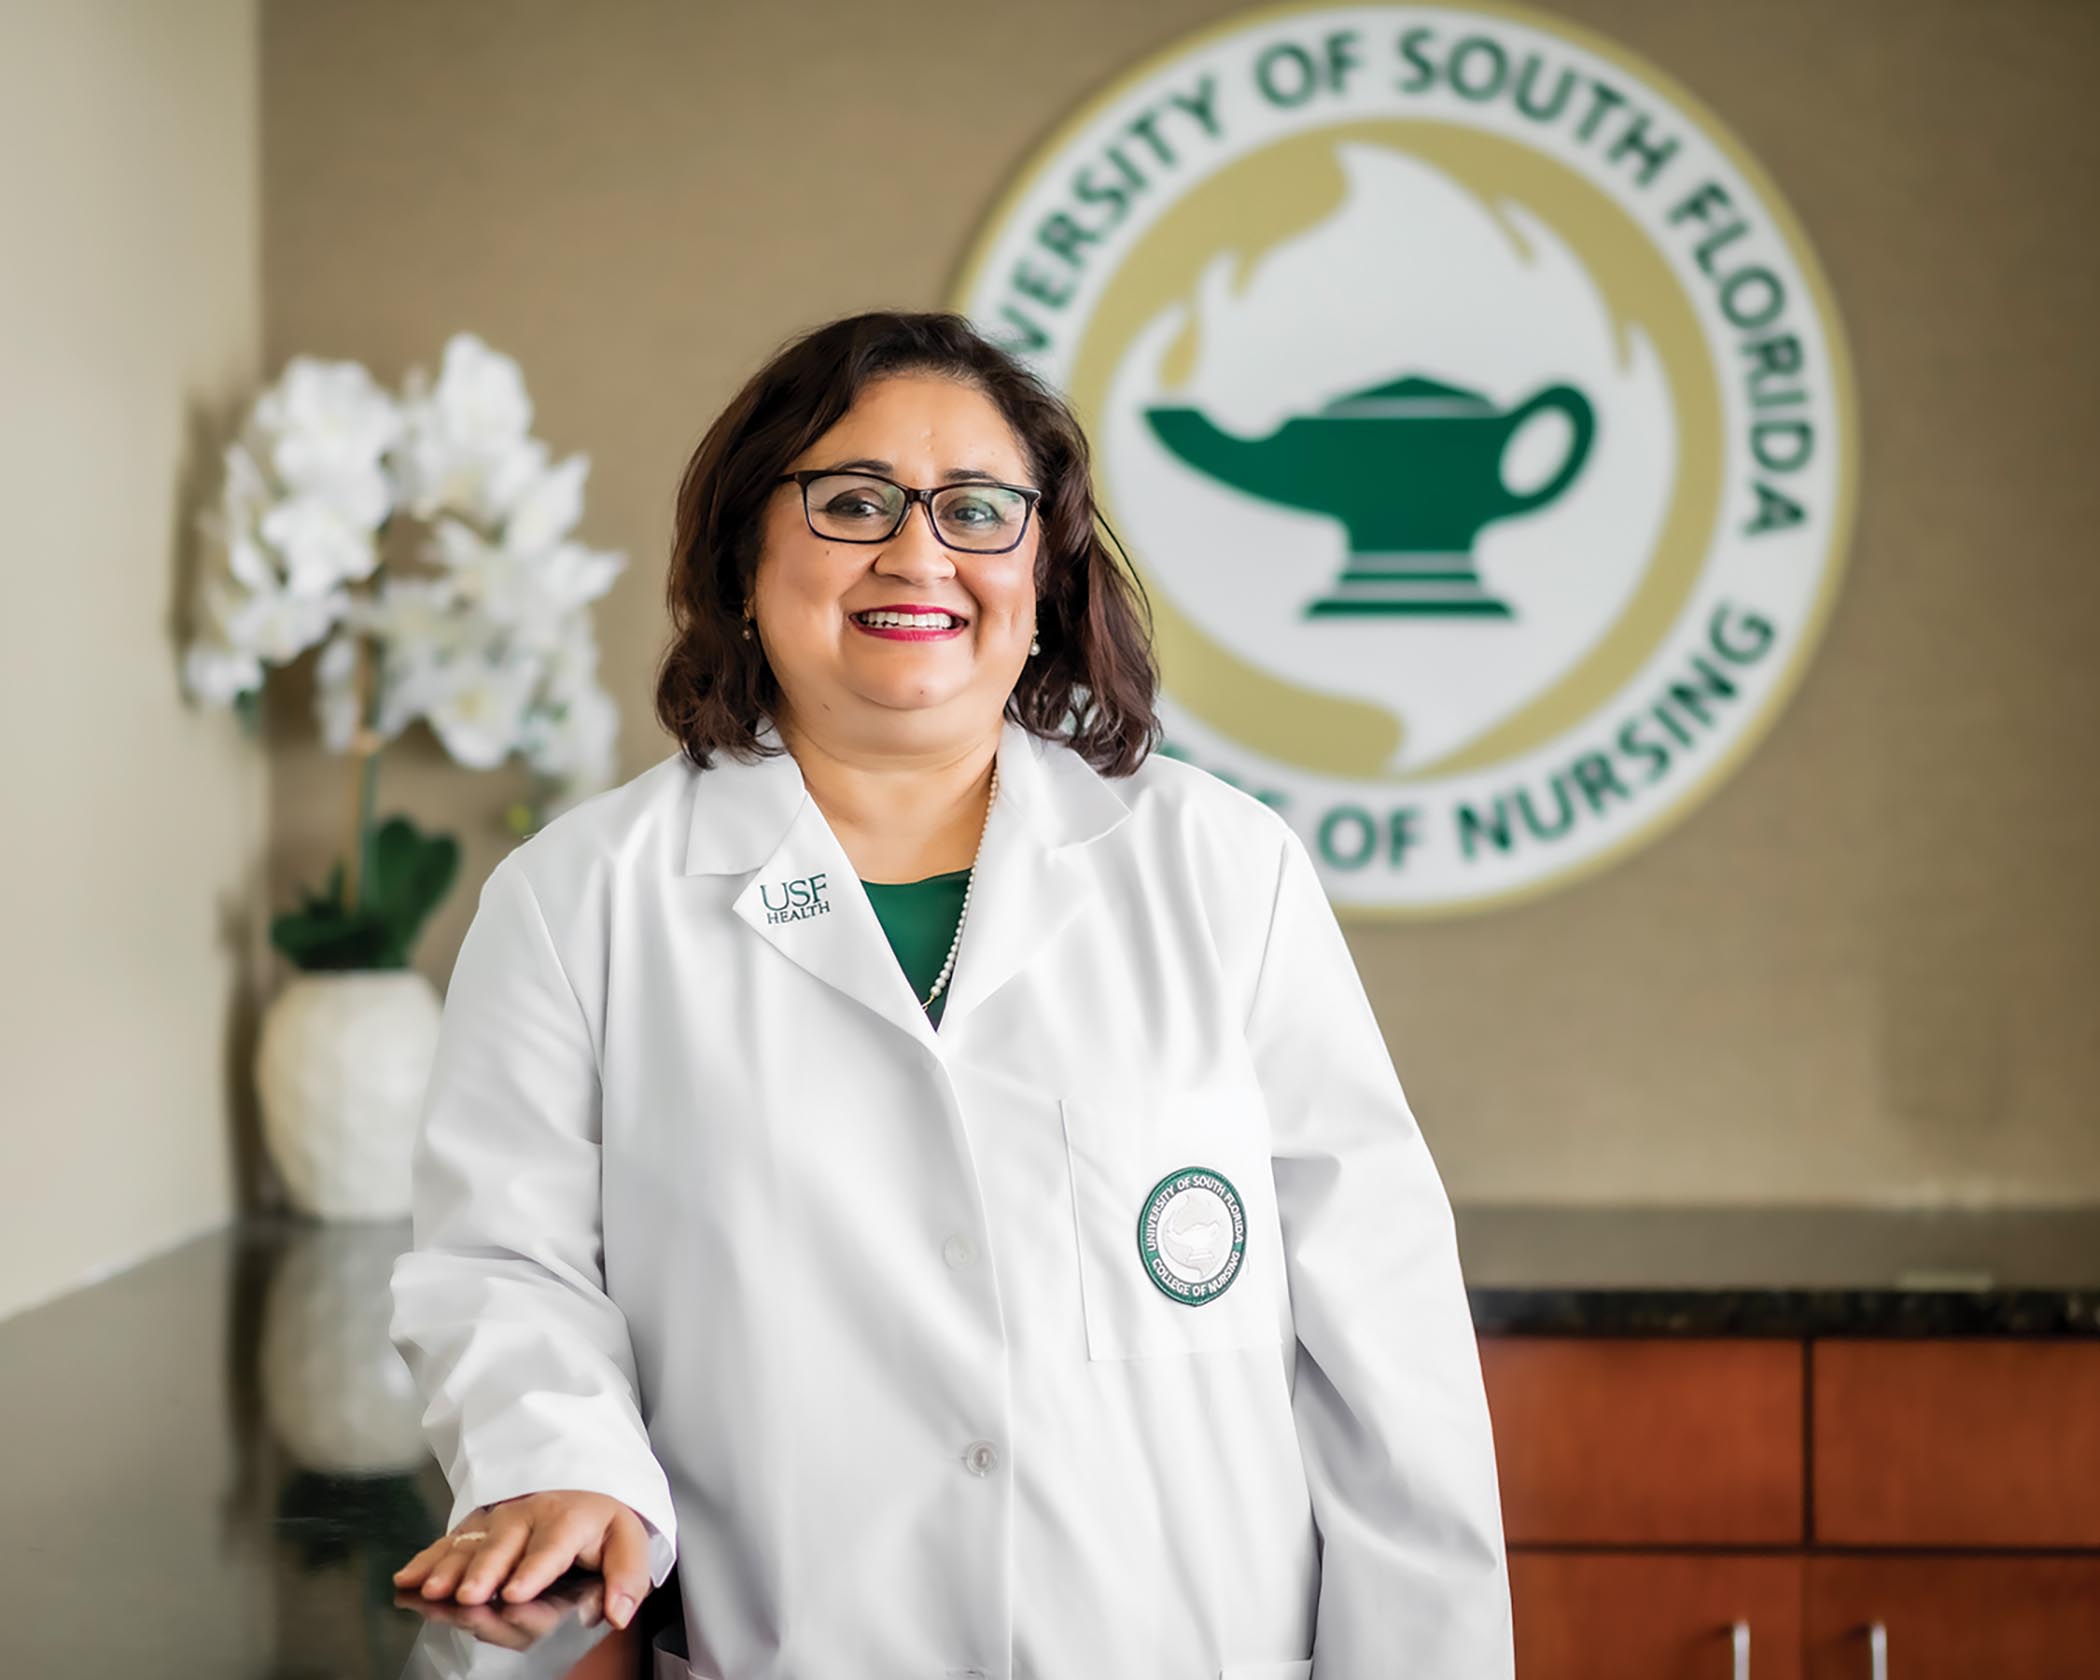 ONS member Usha Menon, PhD, RN, FAAN, is the dean and a professor at the University of South Florida (USF) College of Nursing and a senior associate vice president at USF Health in Tampa. 